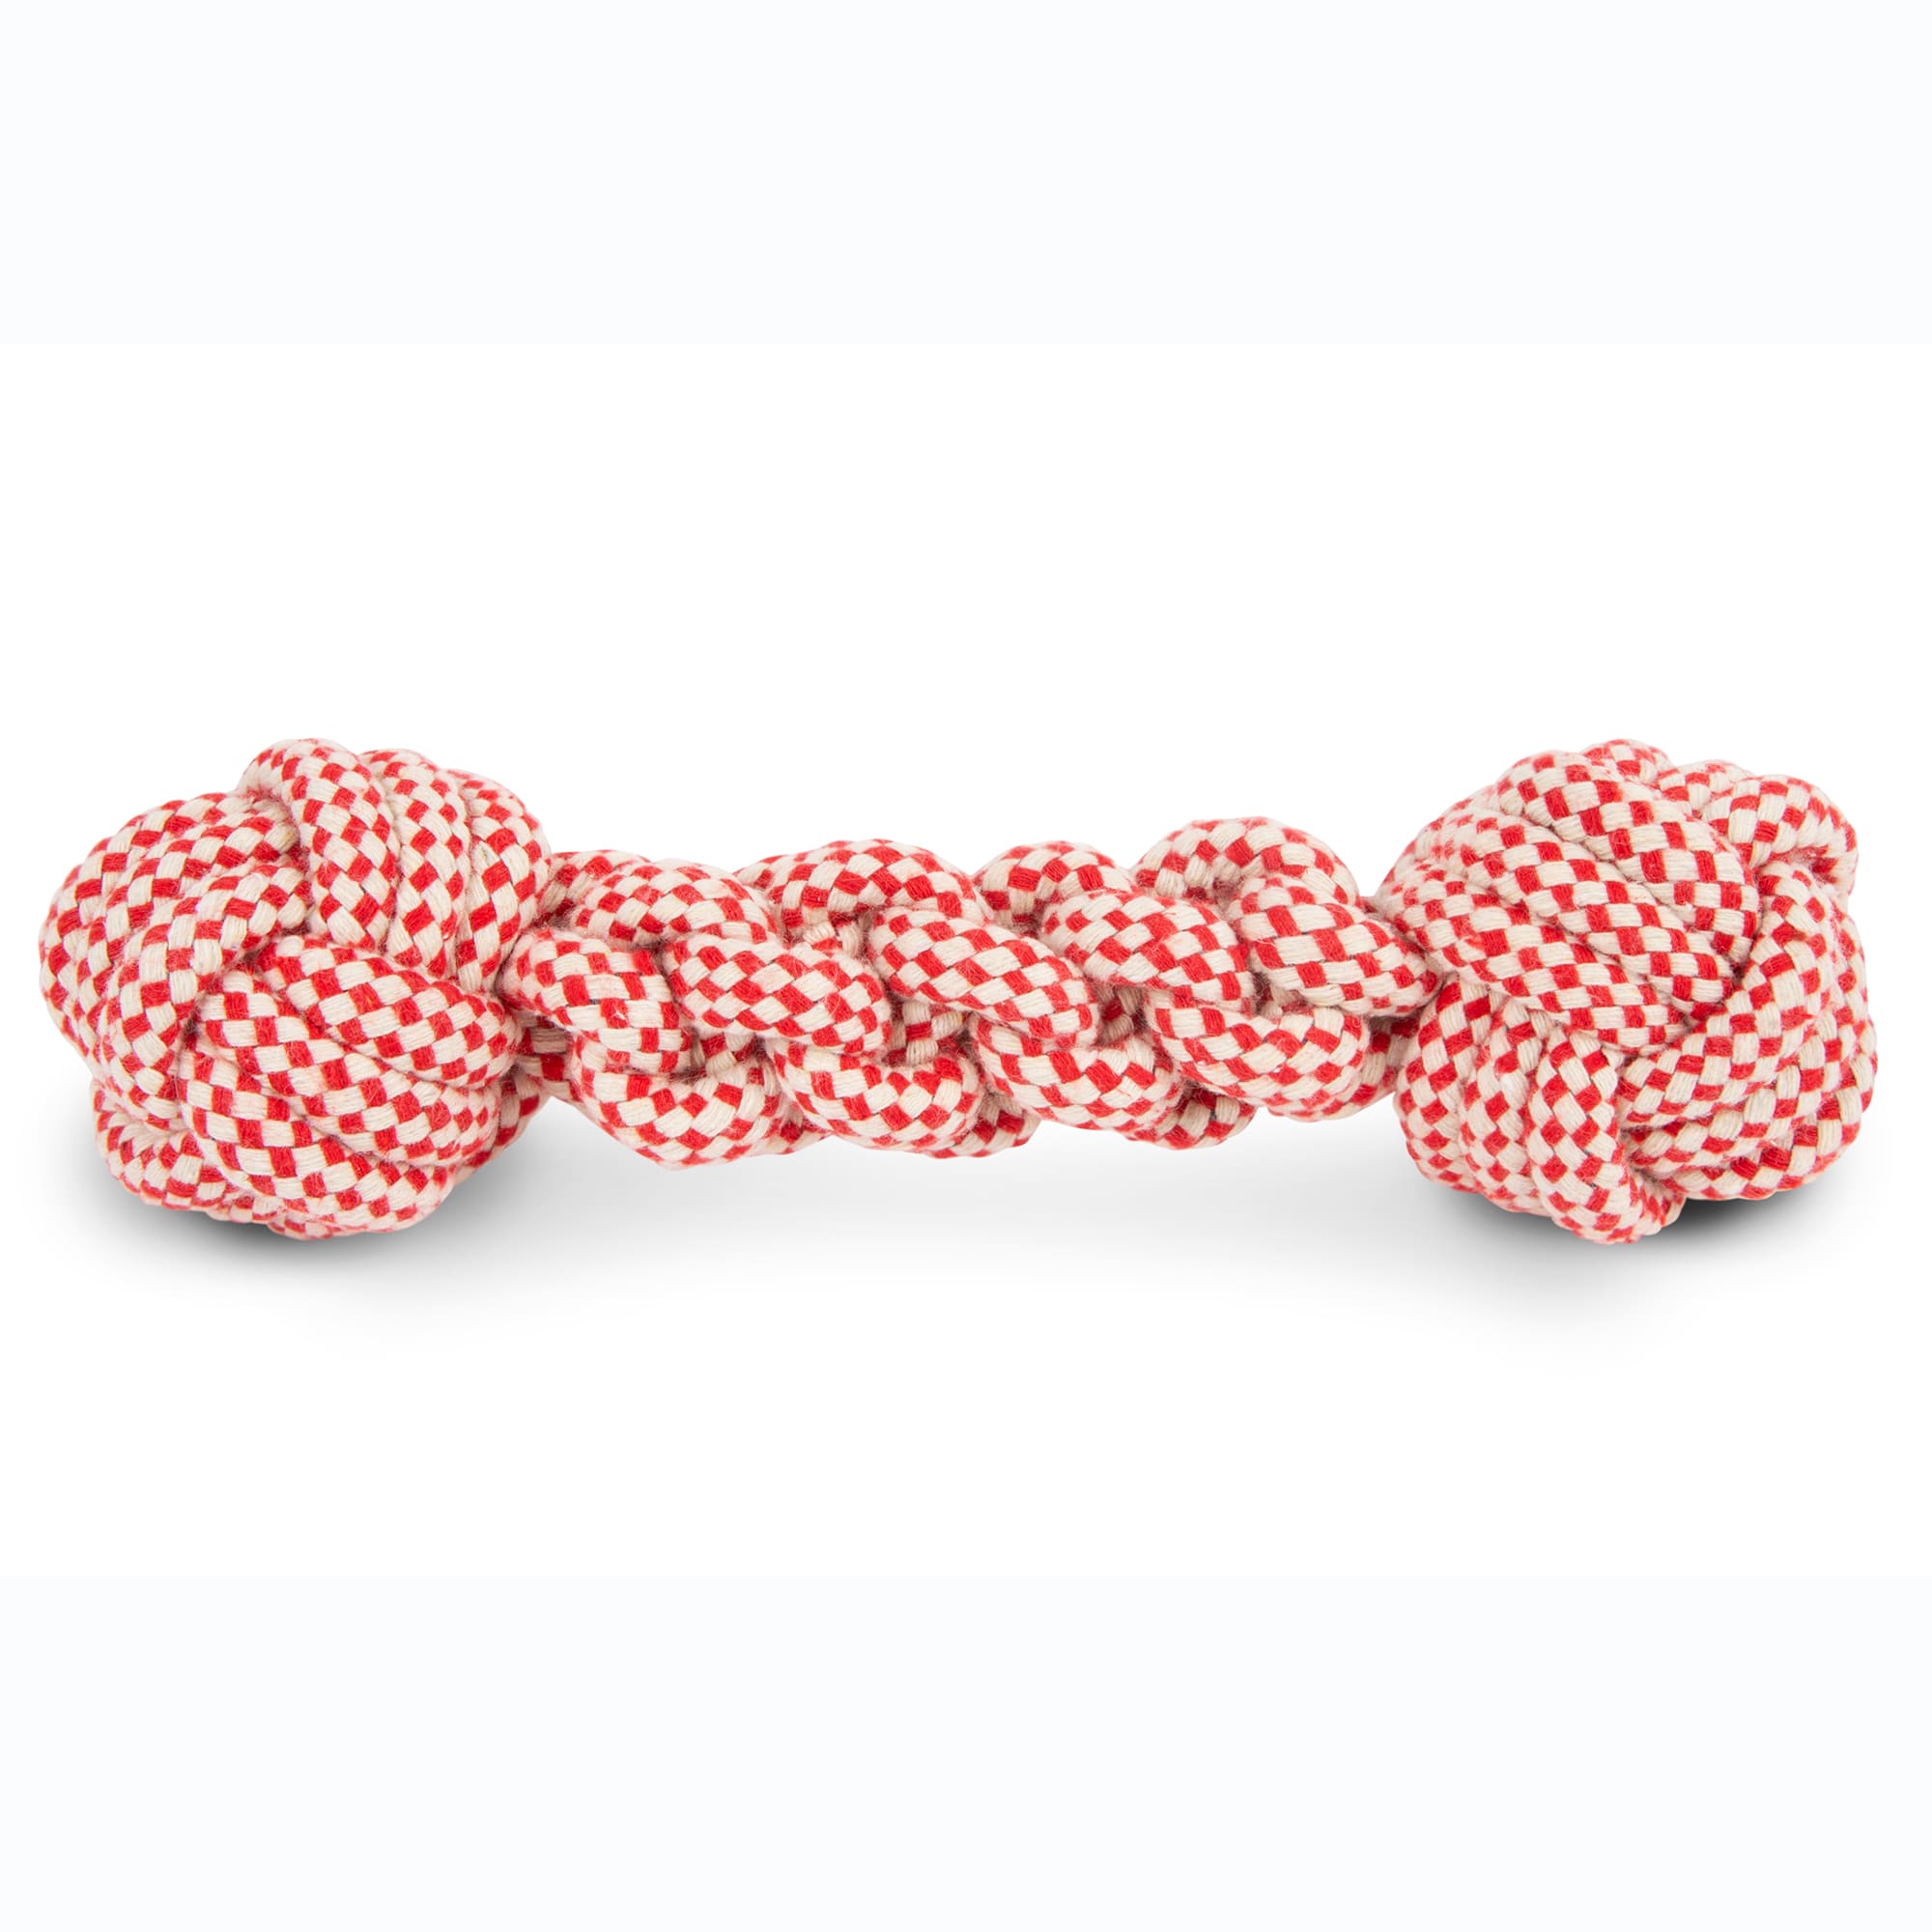 NCAA Pet Tug Toys Bone with Rope Toy Louisville Cardinals Red/Gray